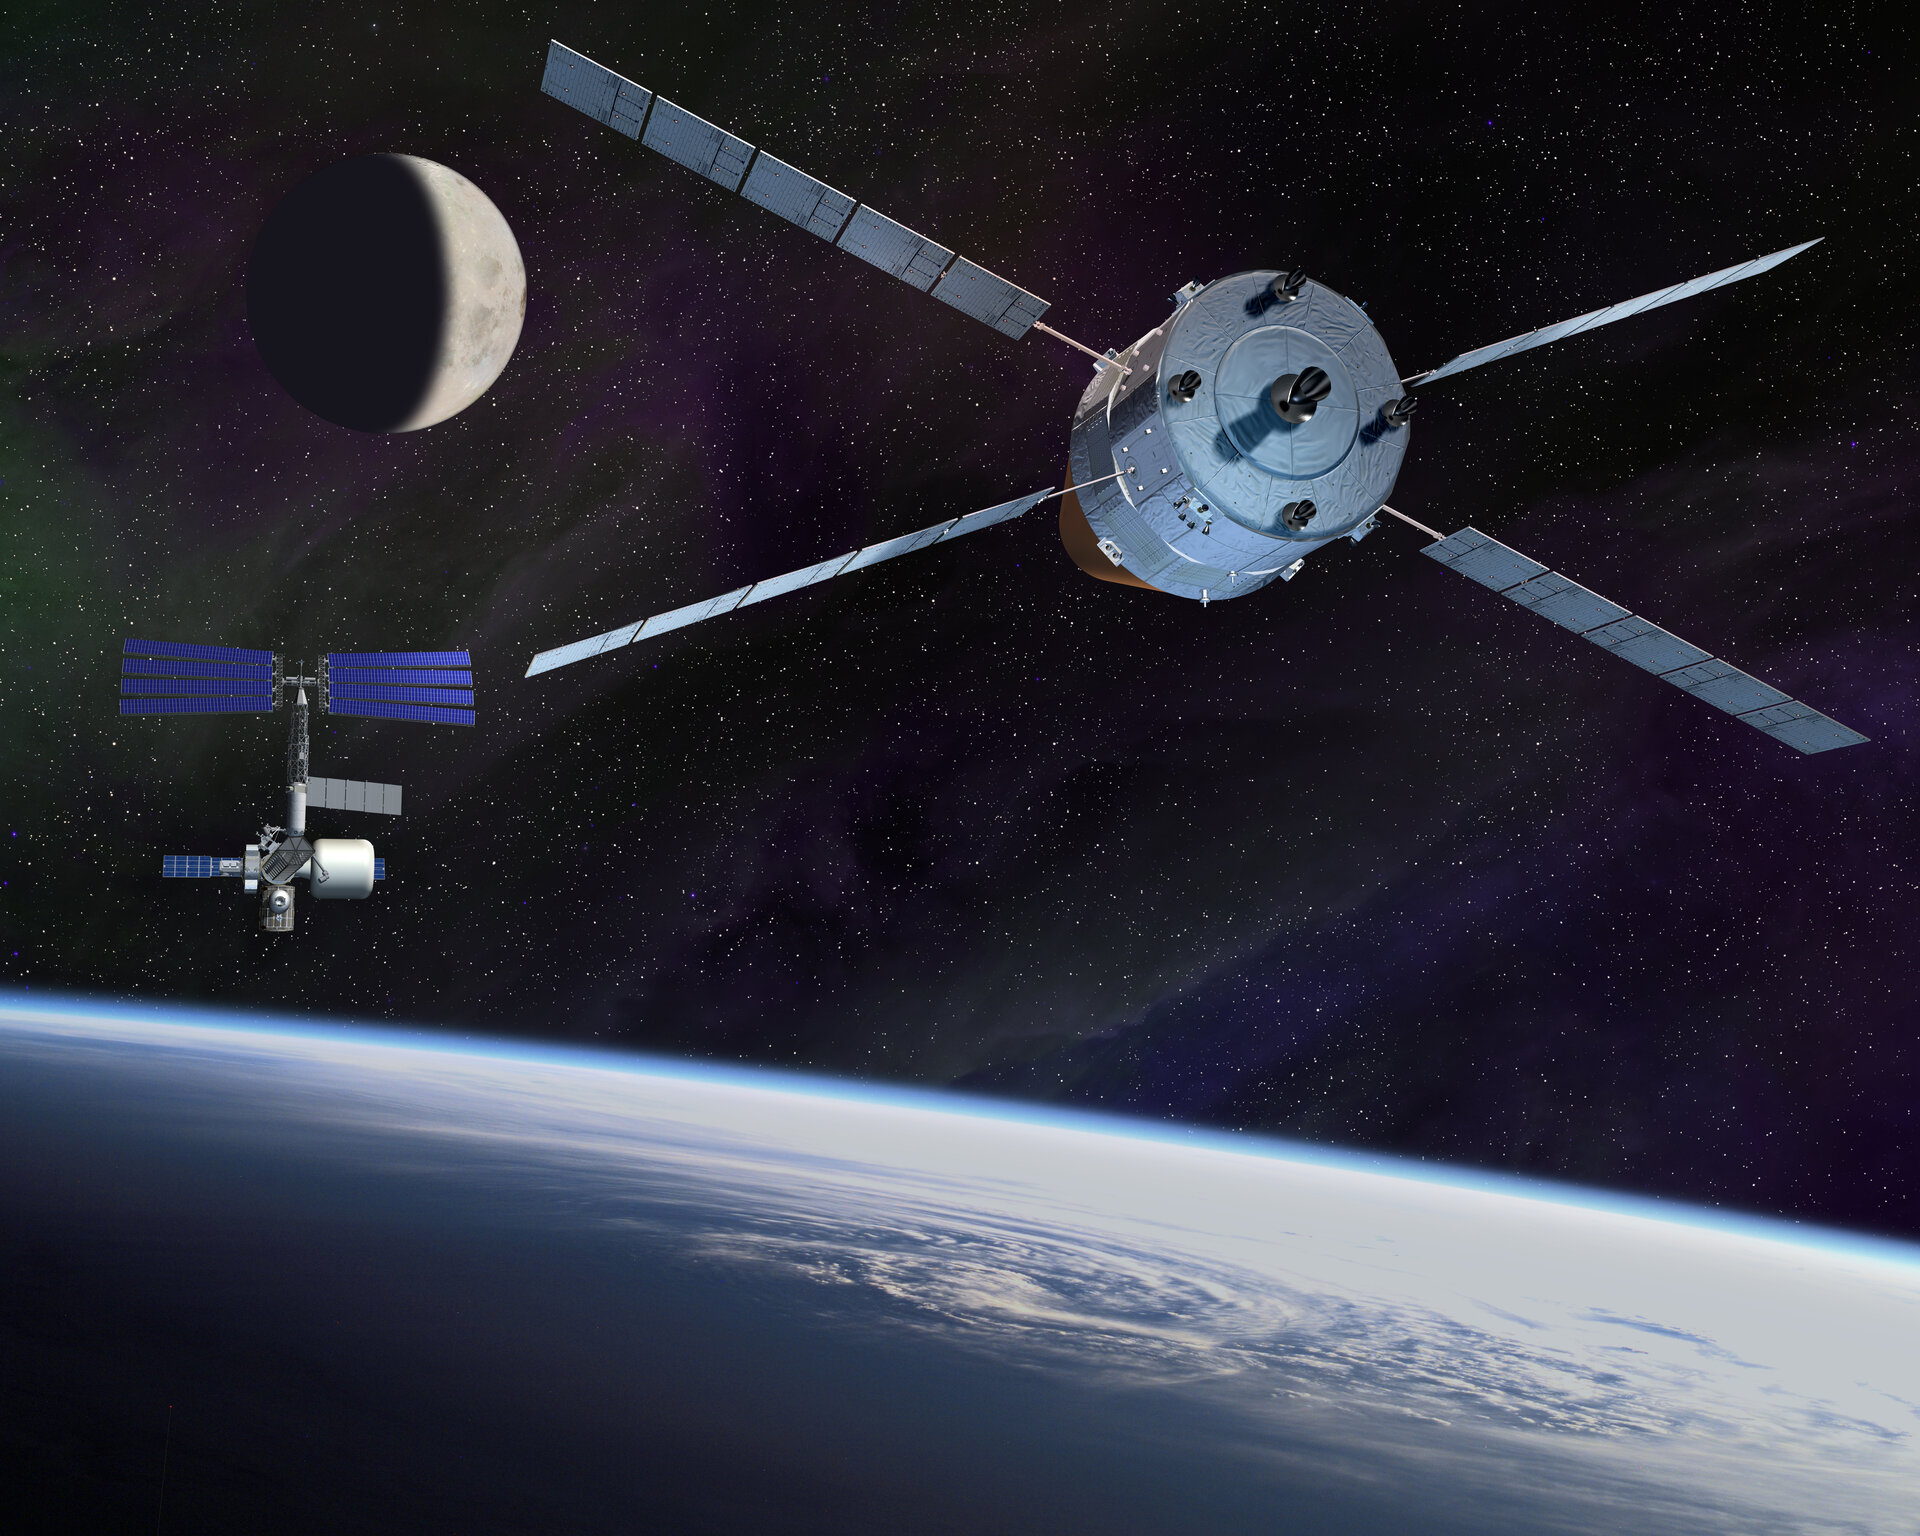 Artist impression of an ATV-based Advanced Reentry Vehicle approaching a future space station